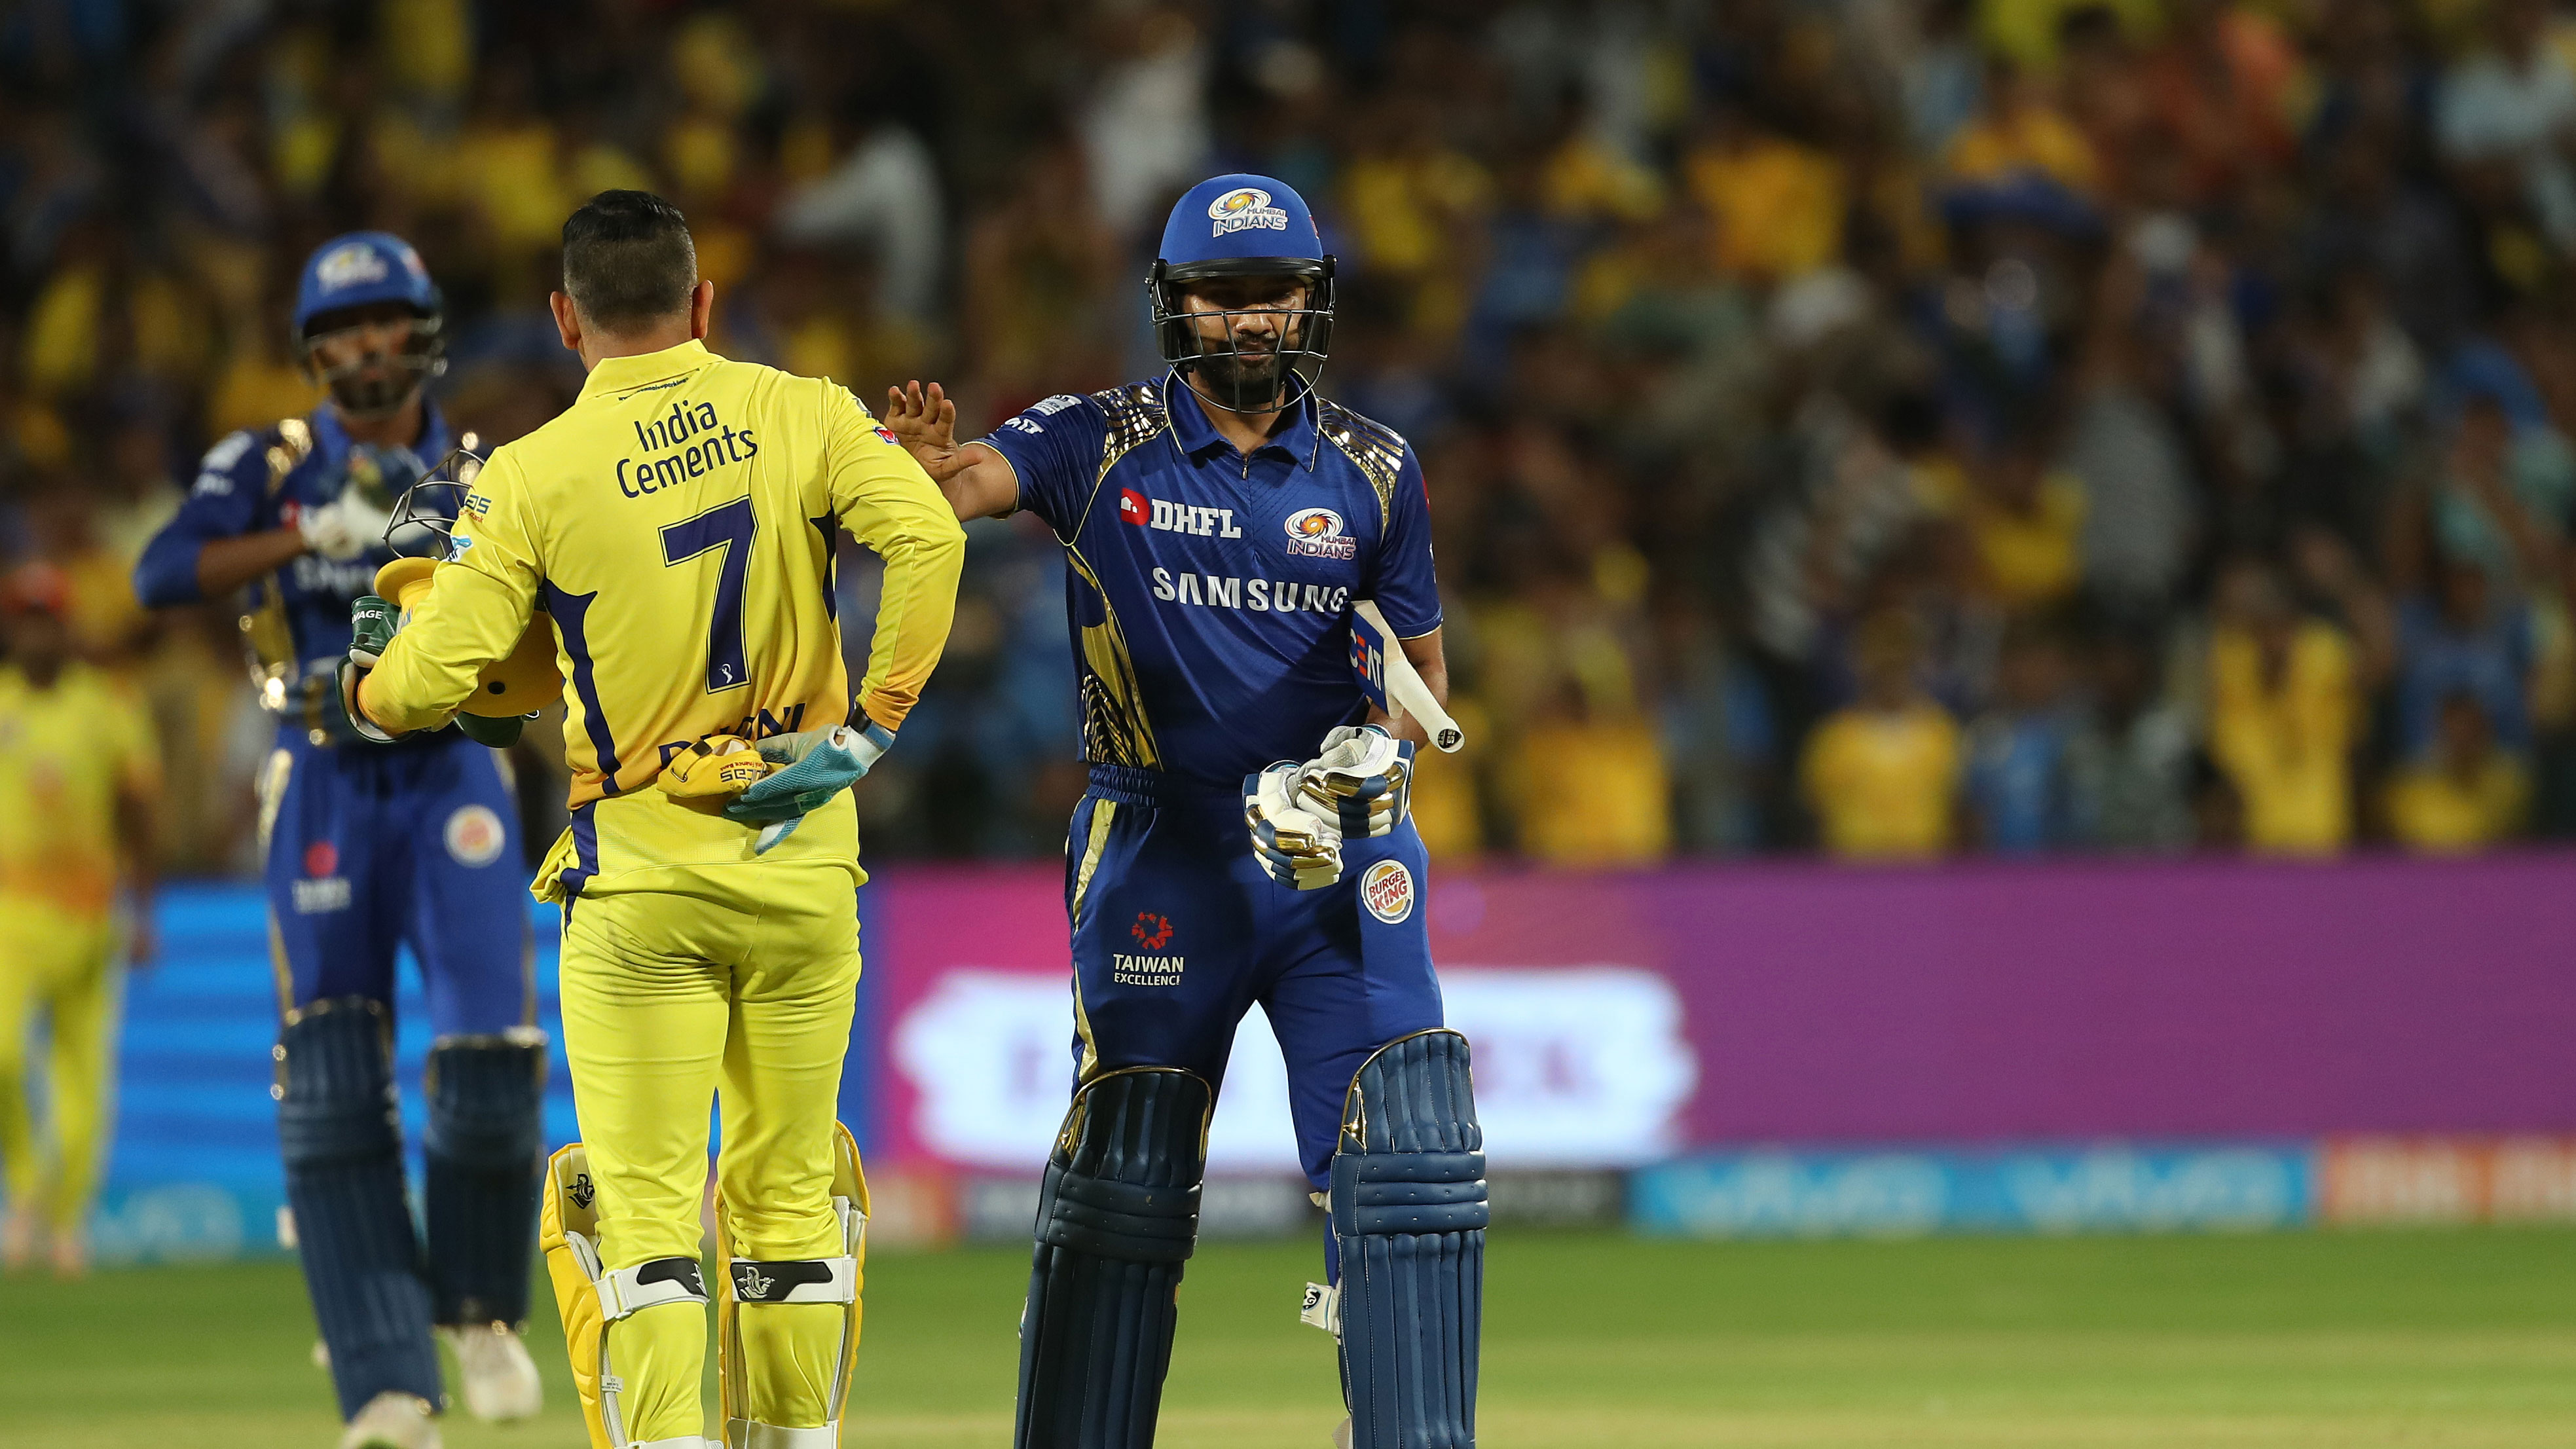 A Glimpse Of All The Mumbai Indians vs Chennai Super Kings IPL Finals 1